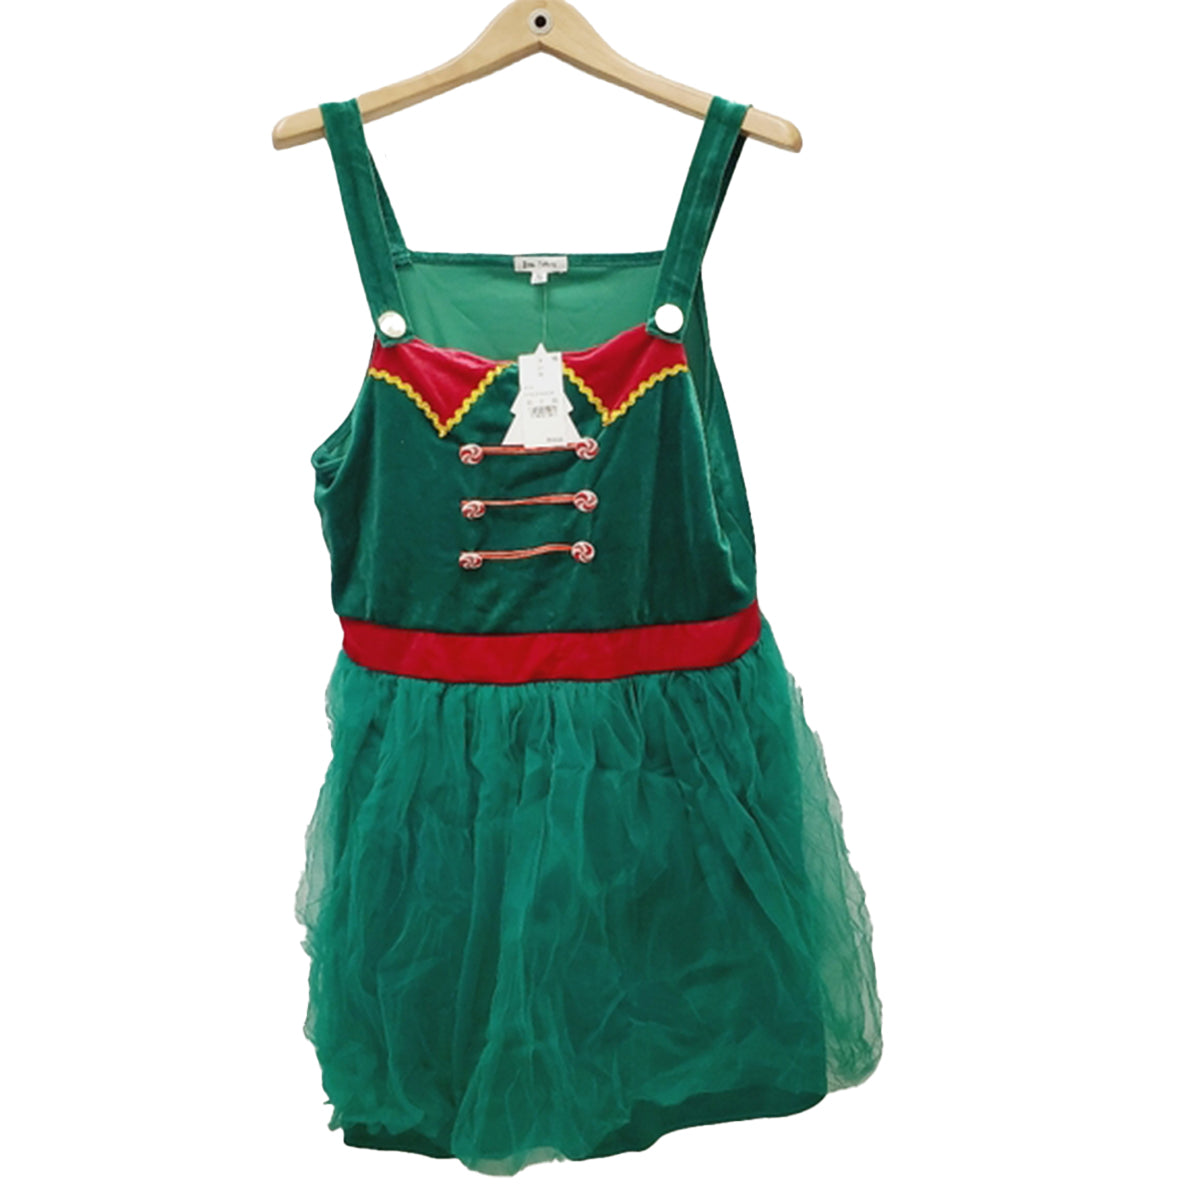 Born Famous Women’s Toy Solider Christmas Holiday Dress L-3X